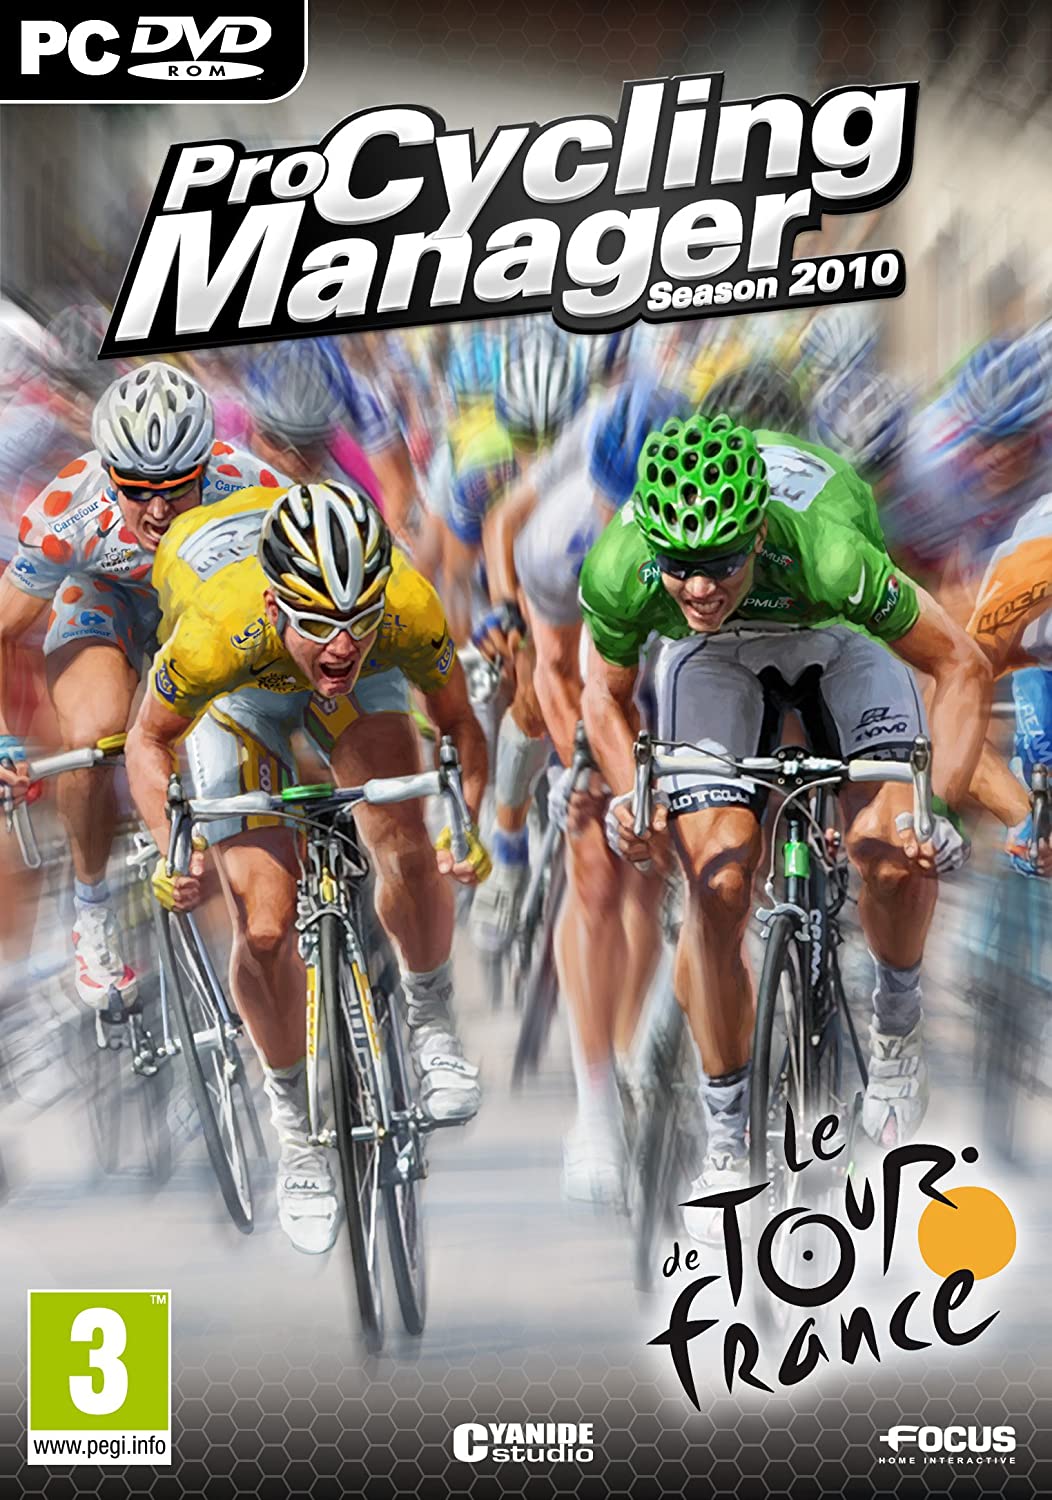 Pro Cycling Manager 2010 (PC DVD)